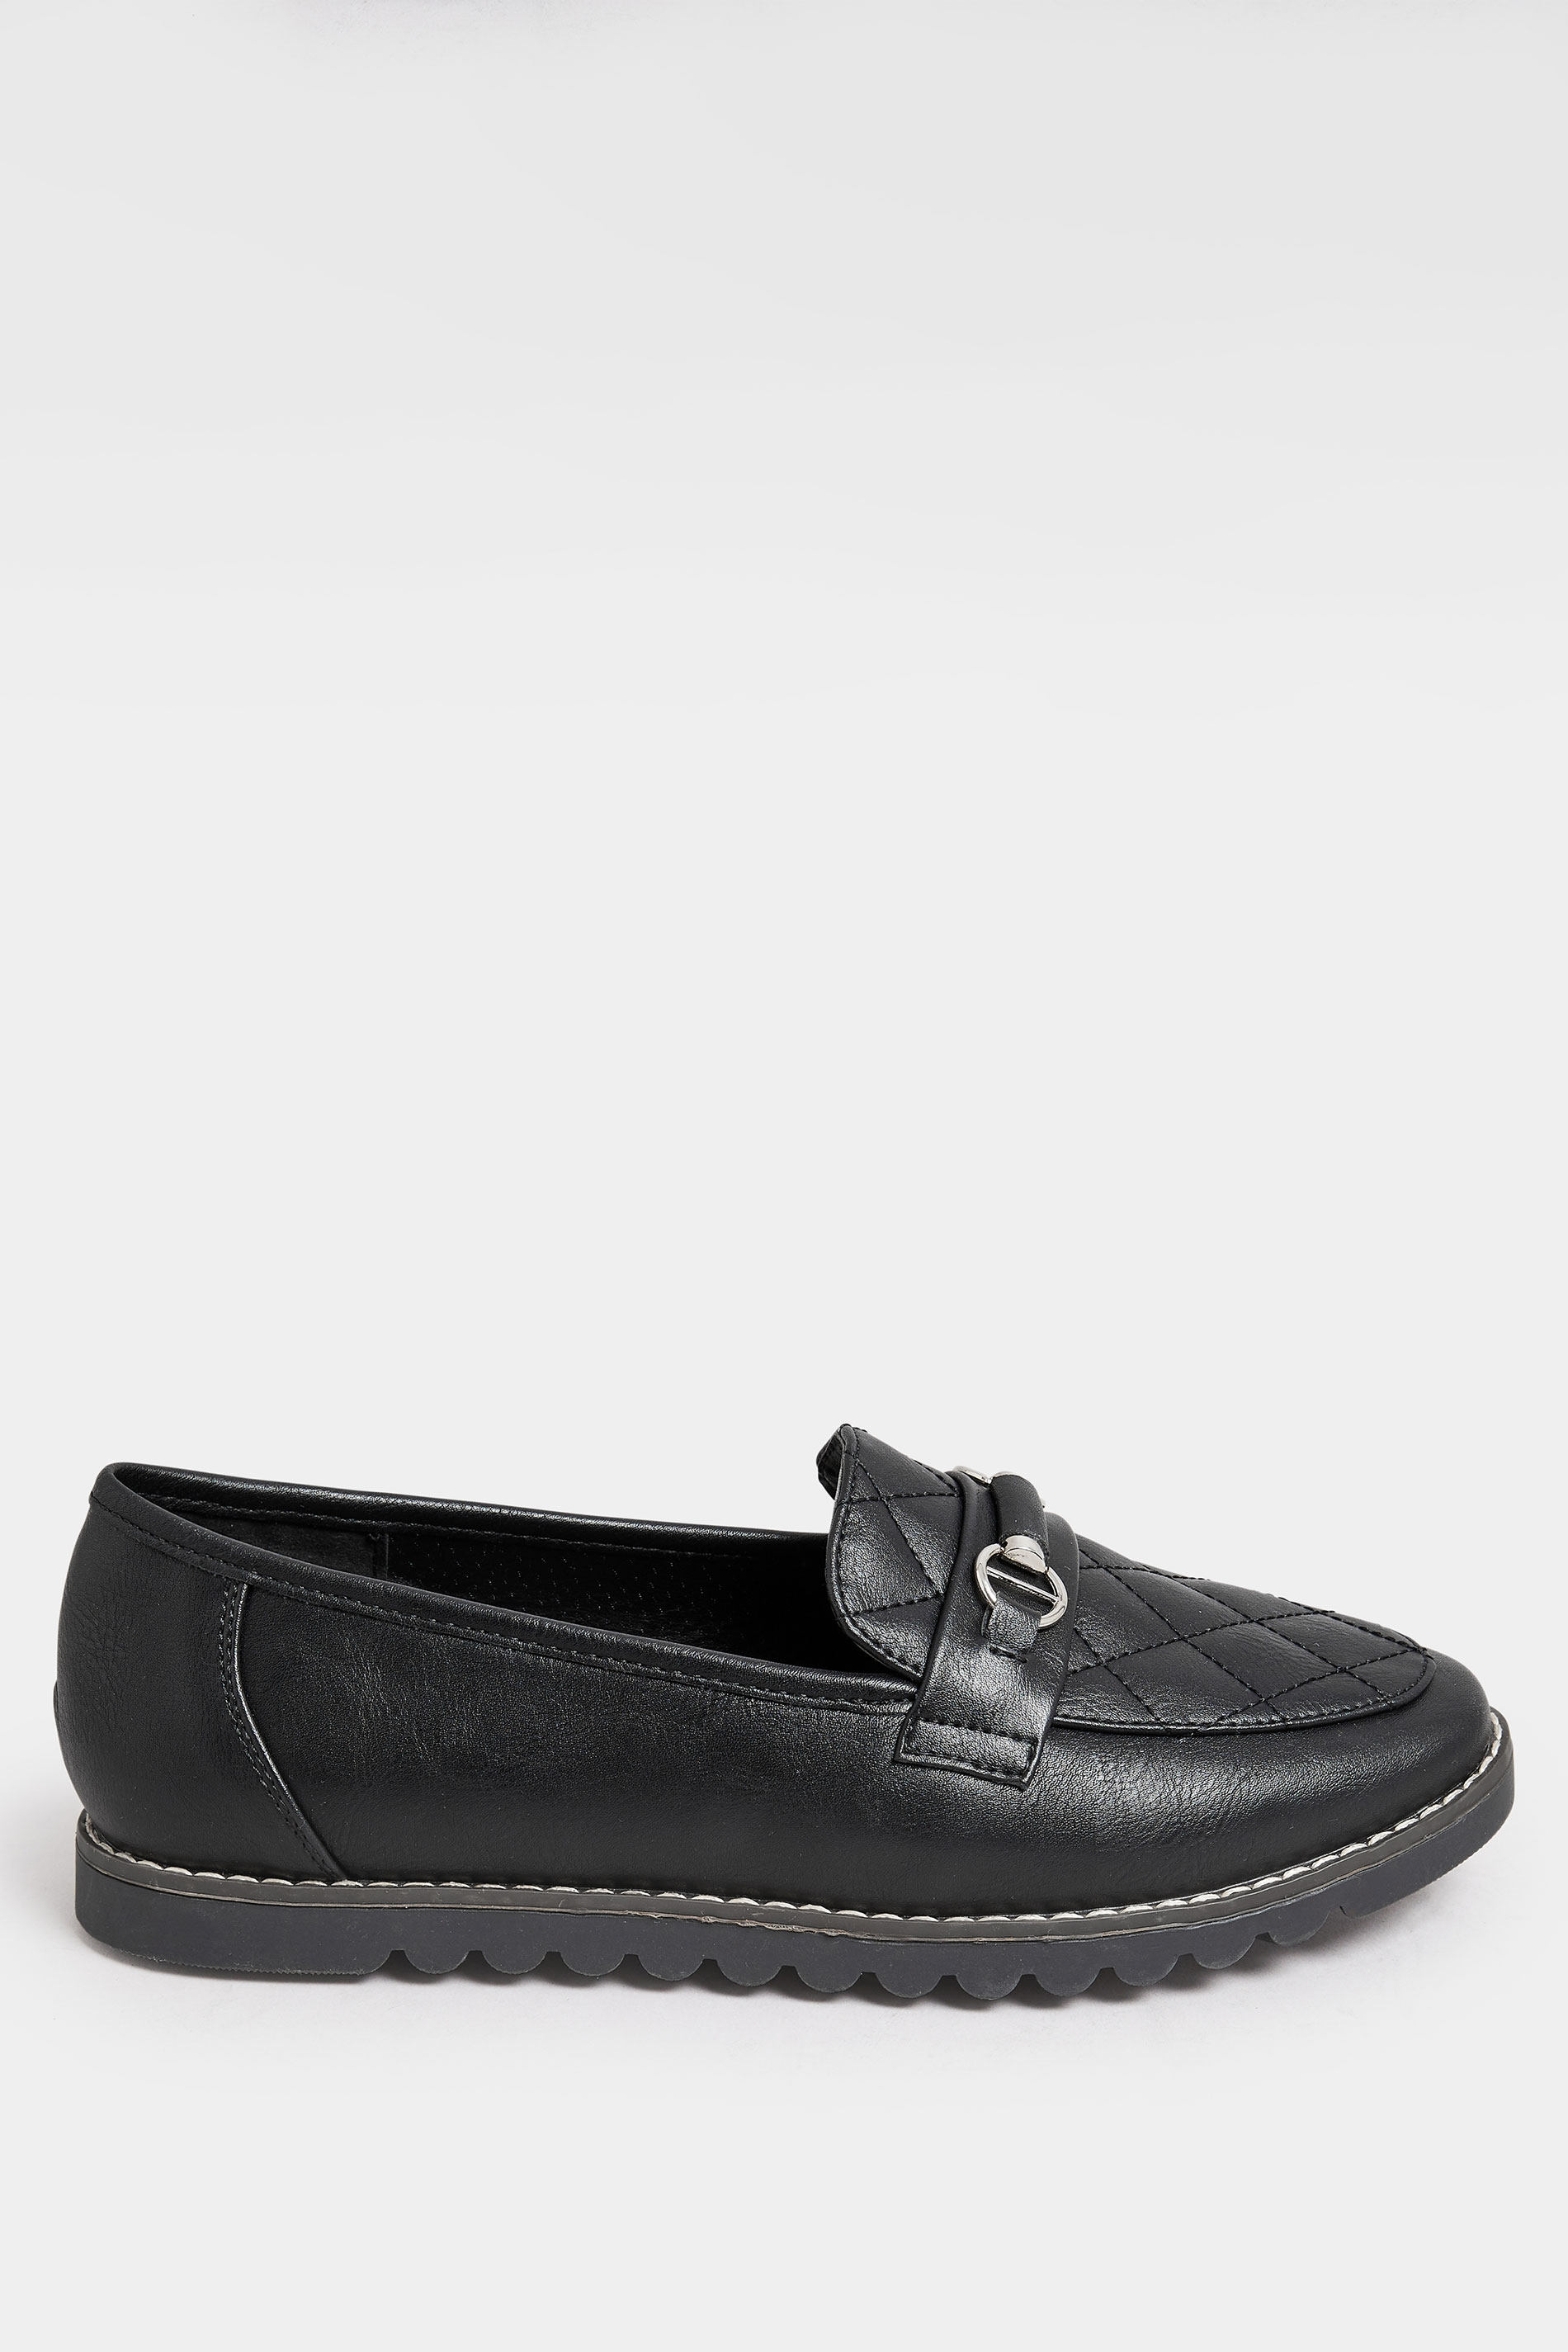 Black Quilted Loafer In Extra Wide EEE Fit | Yours Clothing 3